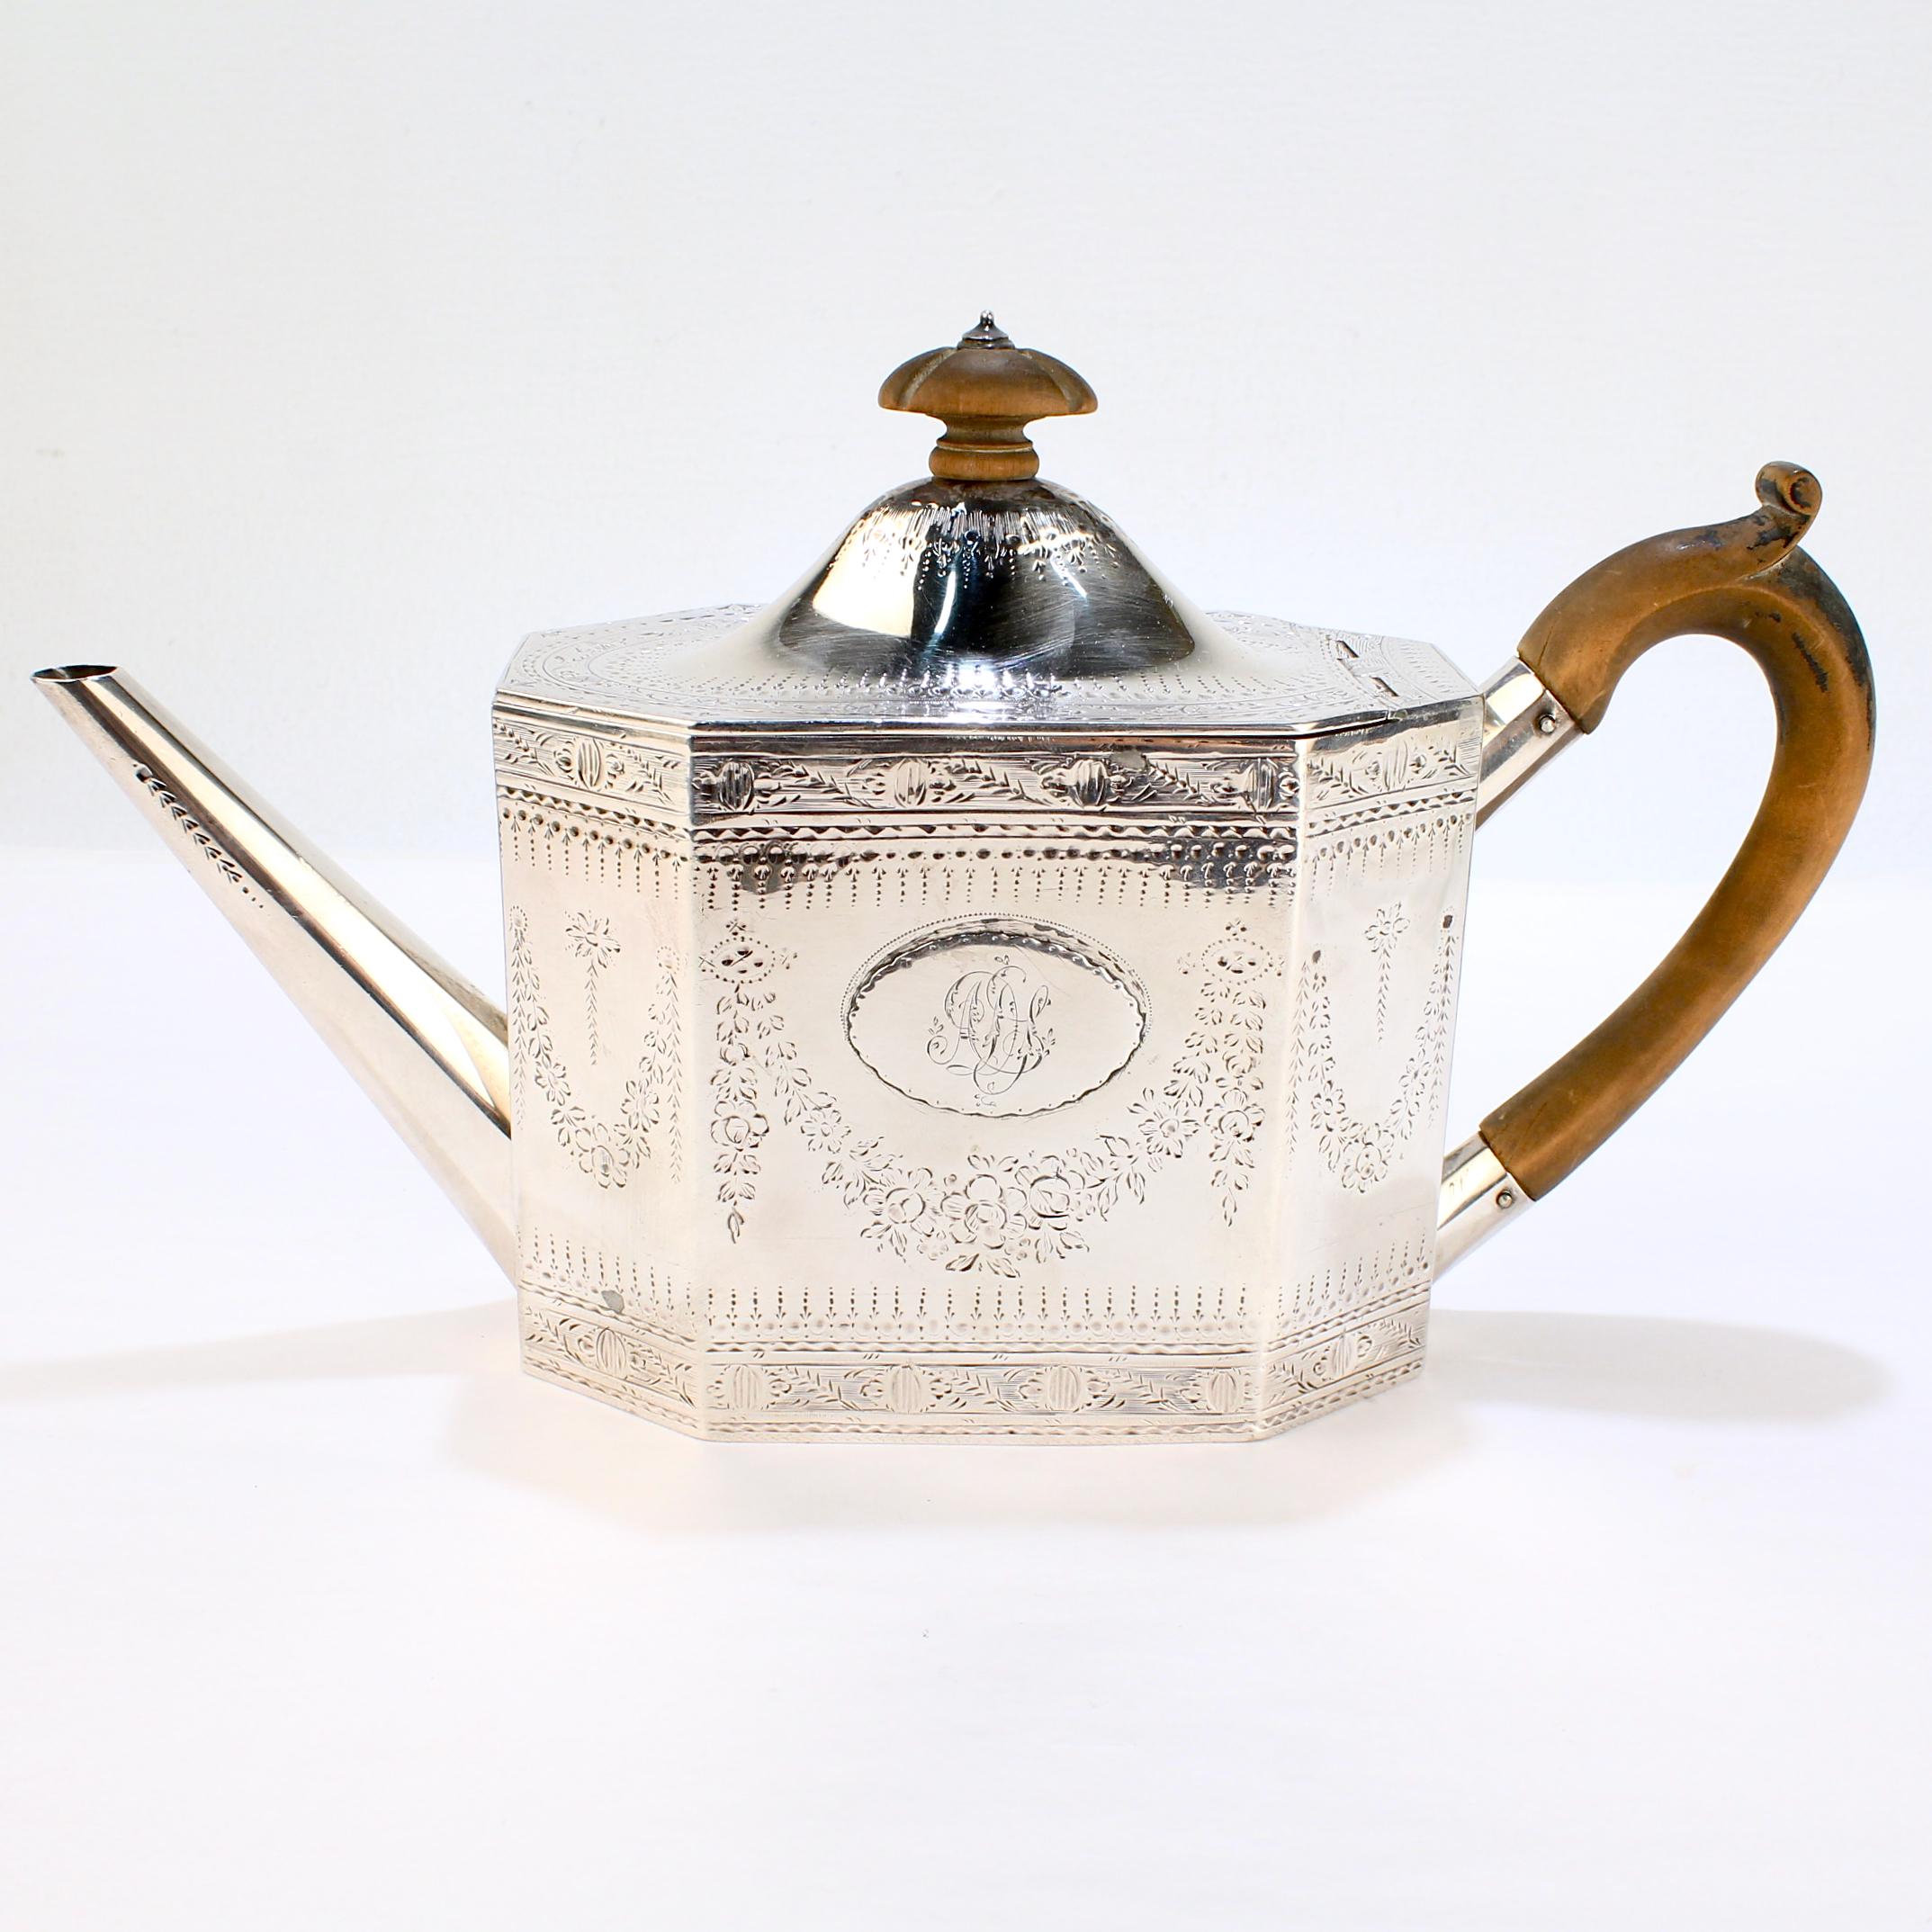 A fine English Georgian sterling silver teapot.

Marked for William Sumner I. 

With hand-chased decoration throughout and a wooden handle & finial that retain traces of their ebonized finish.

Simply a fine Georgian teapot!

Date:
1787

Overall